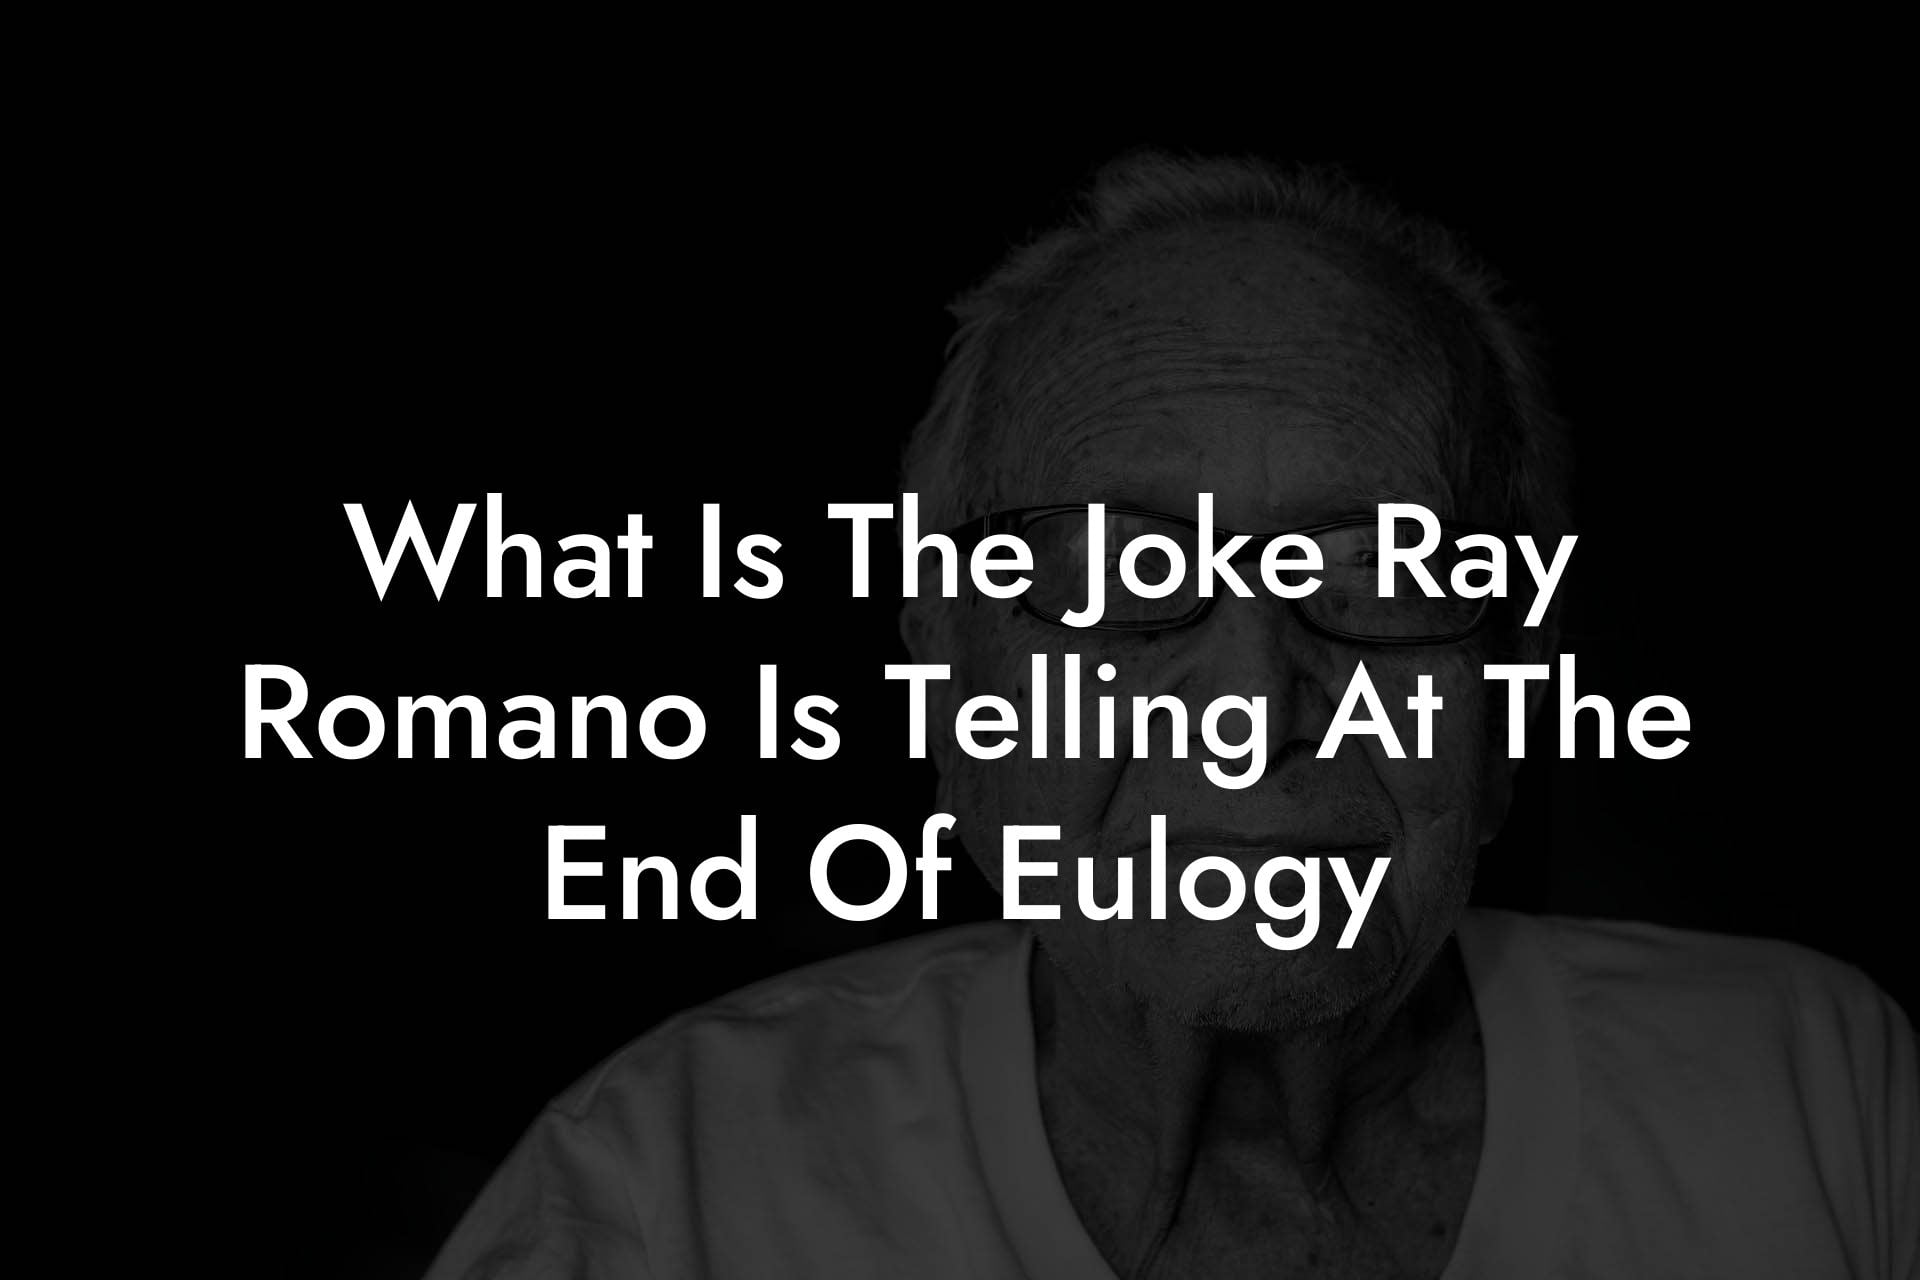 What Is The Joke Ray Romano Is Telling At The End Of Eulogy